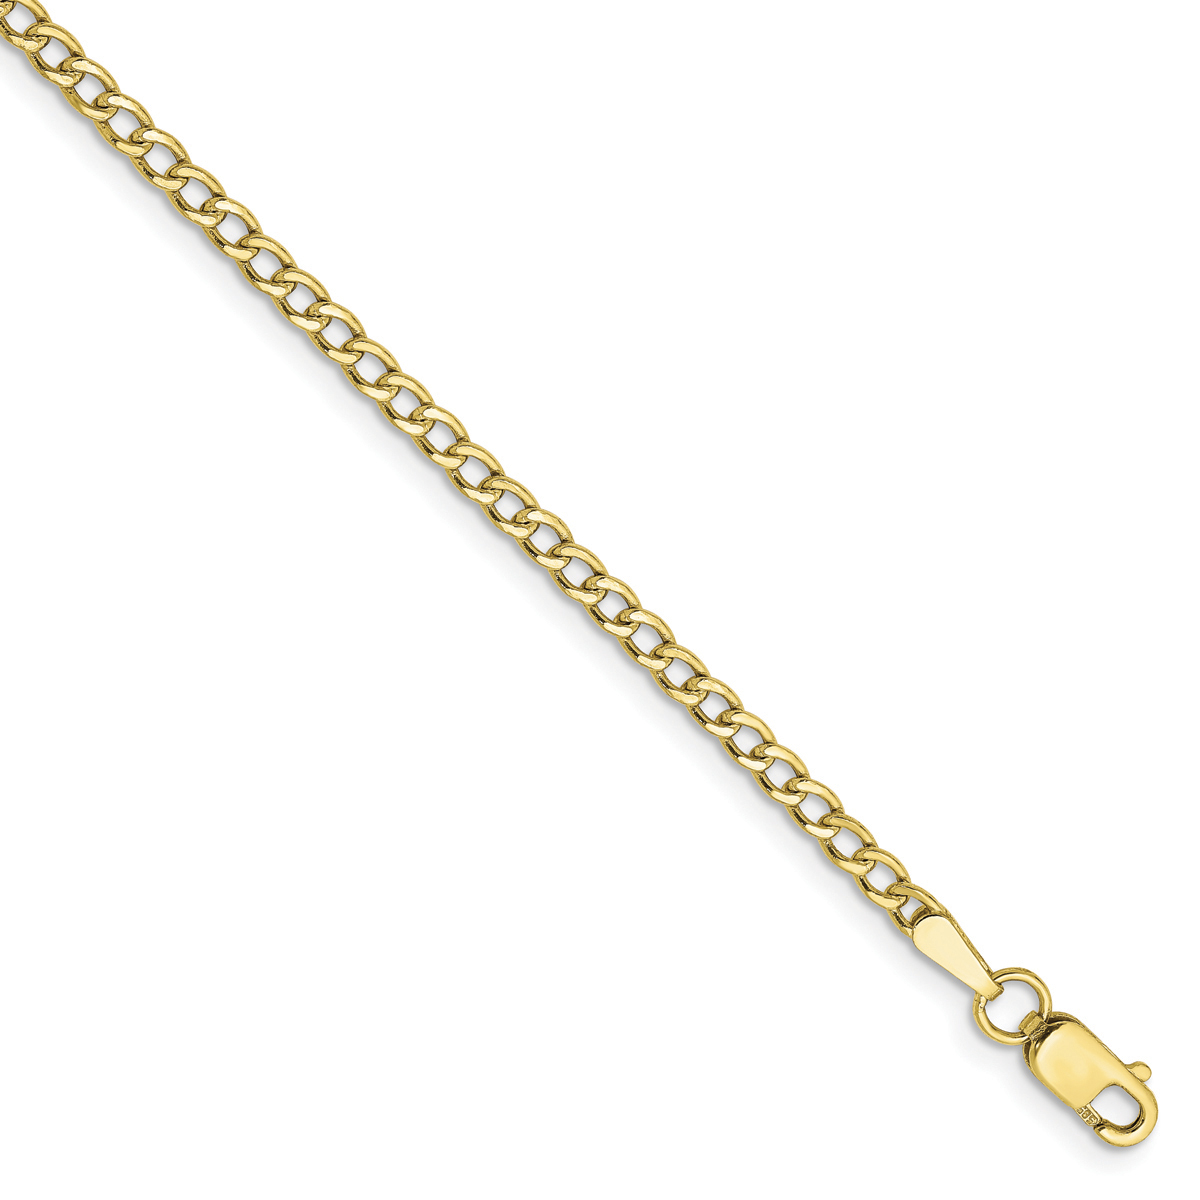 Unisex Gold Classics(tm) 10kt. Gold 2.5mm 16in. Link Chain Necklace